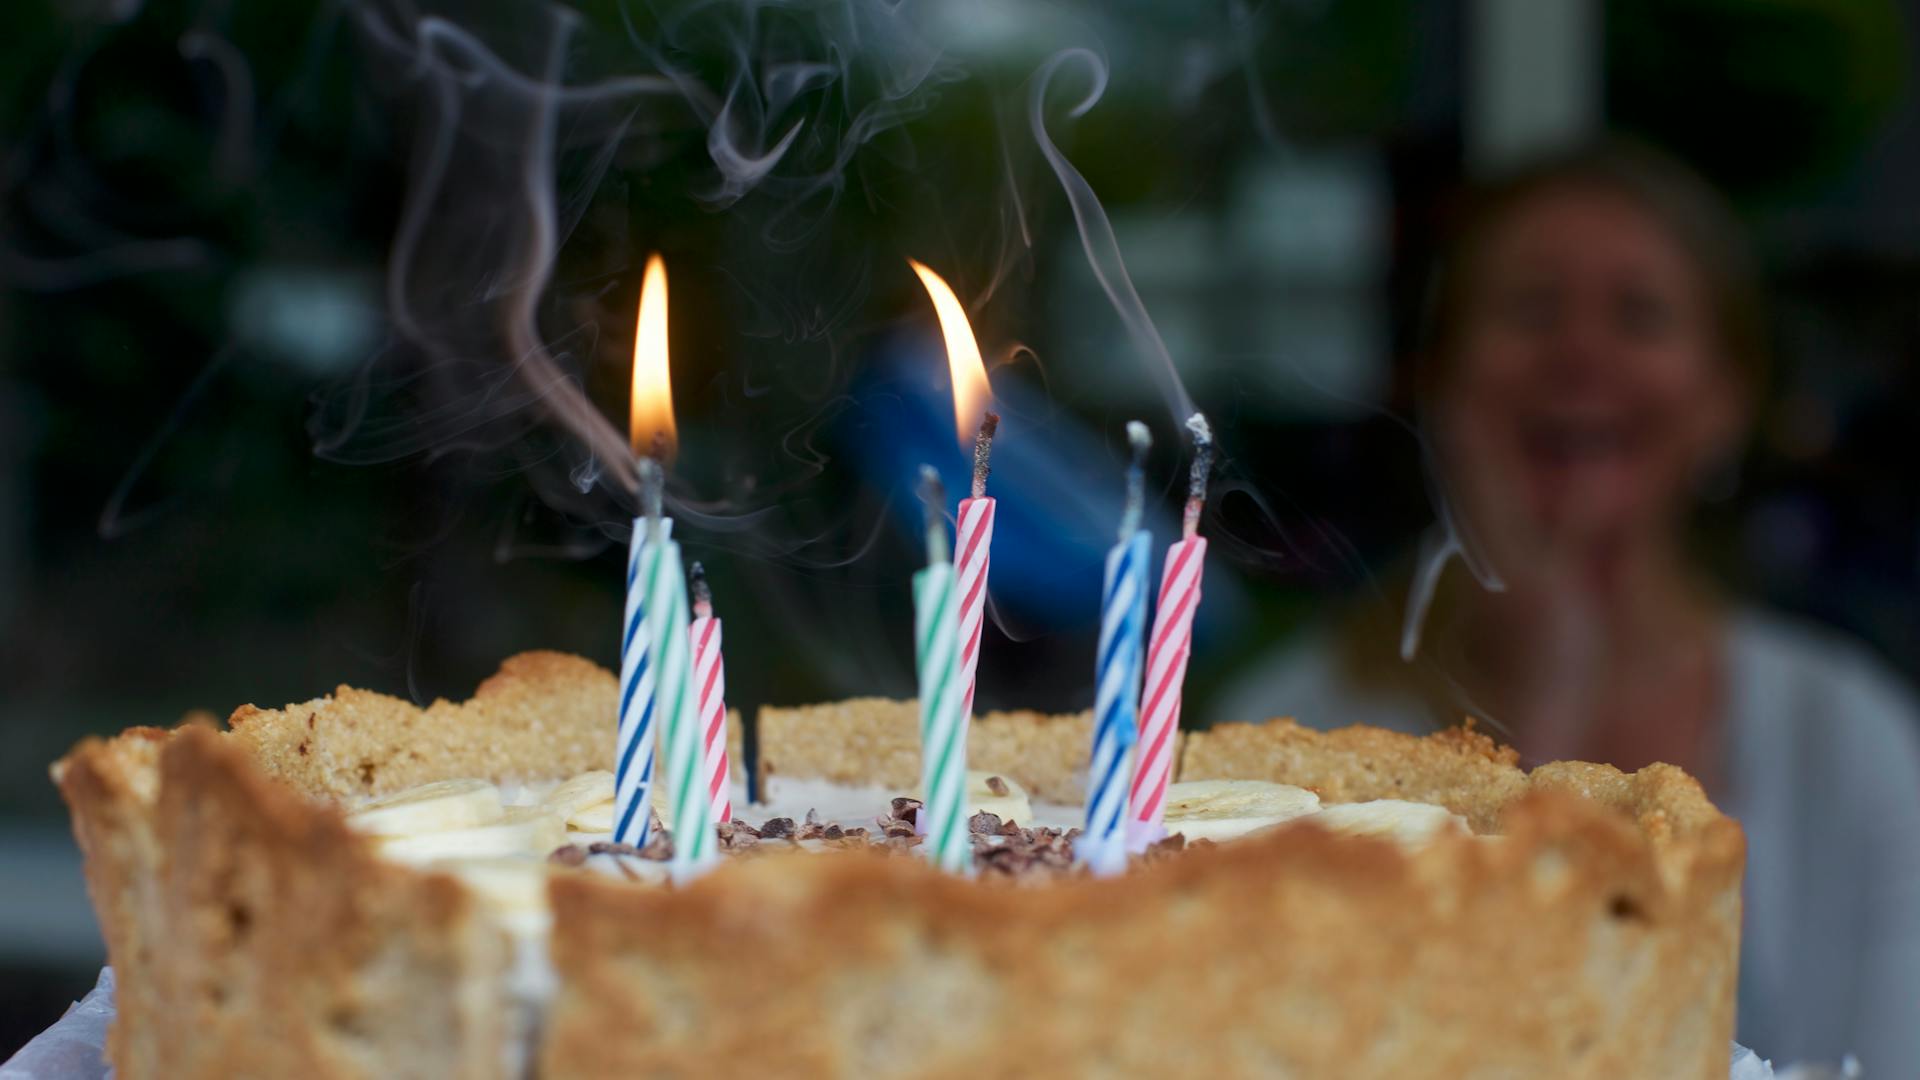 Lit candles on a birthday cake | Source: Pexels